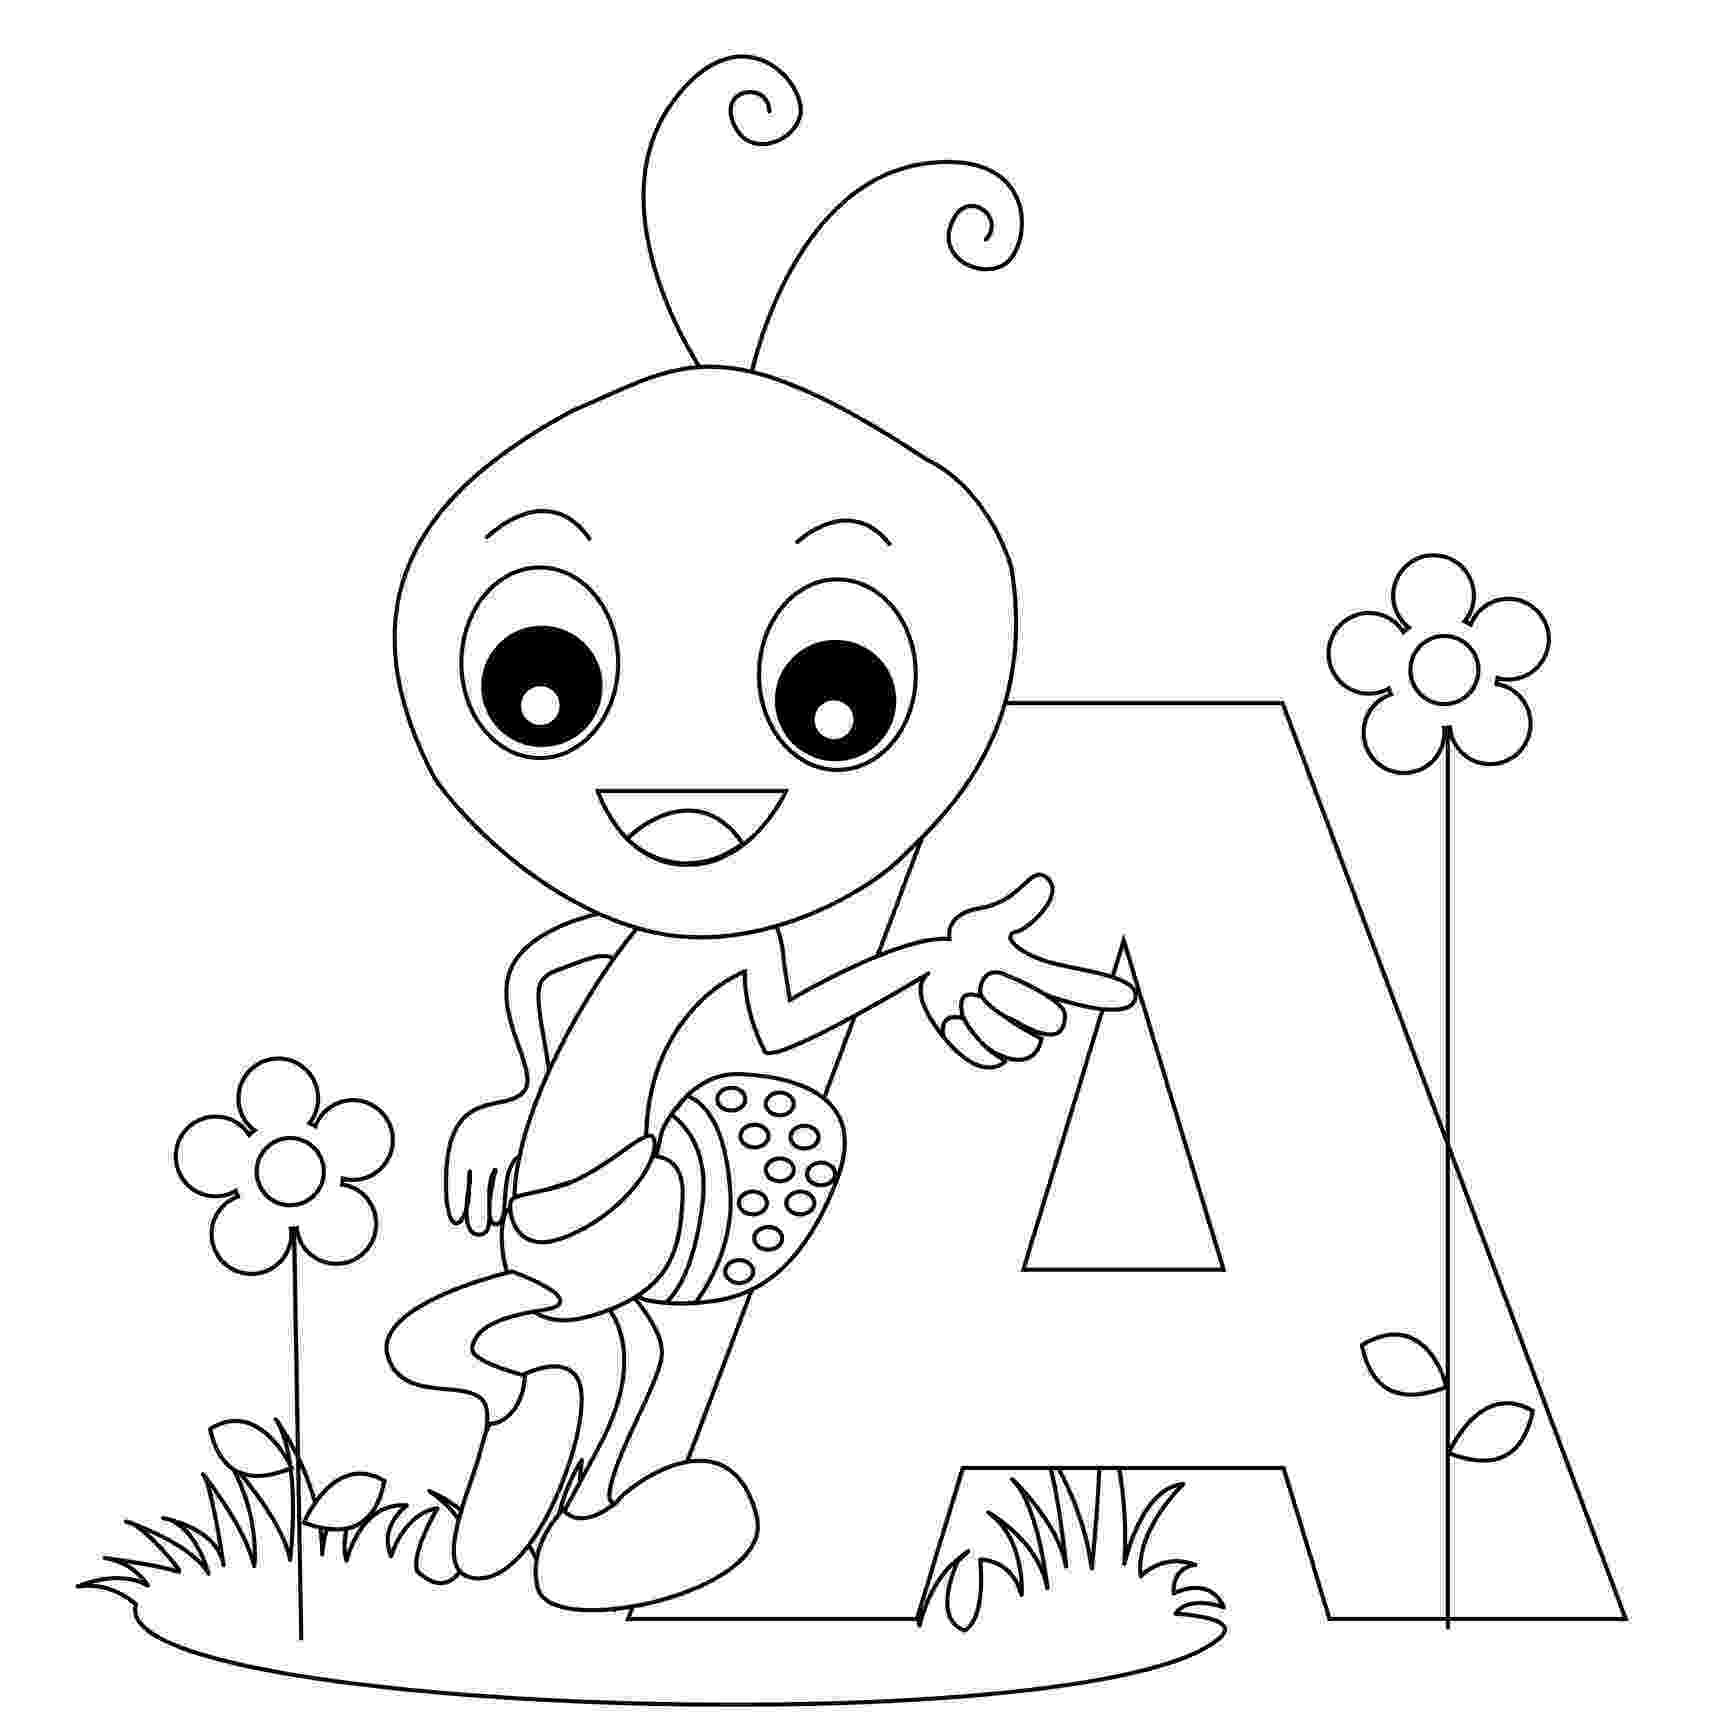 alphabet coloring pages for preschoolers free printable alphabet coloring pages for kids best alphabet pages for preschoolers coloring 